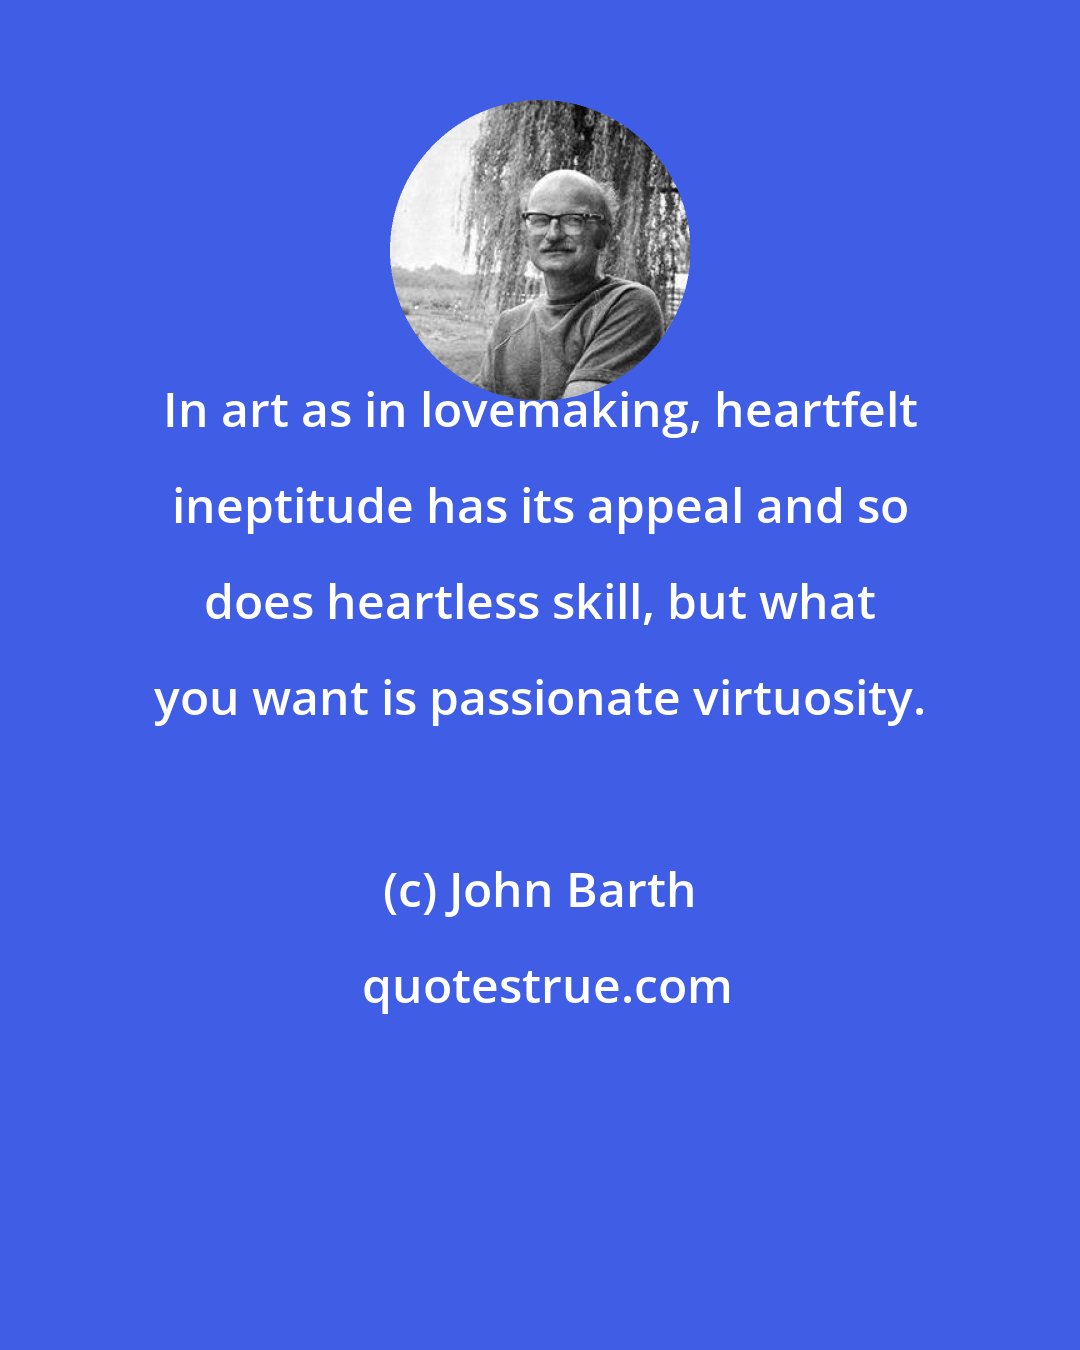 John Barth: In art as in lovemaking, heartfelt ineptitude has its appeal and so does heartless skill, but what you want is passionate virtuosity.